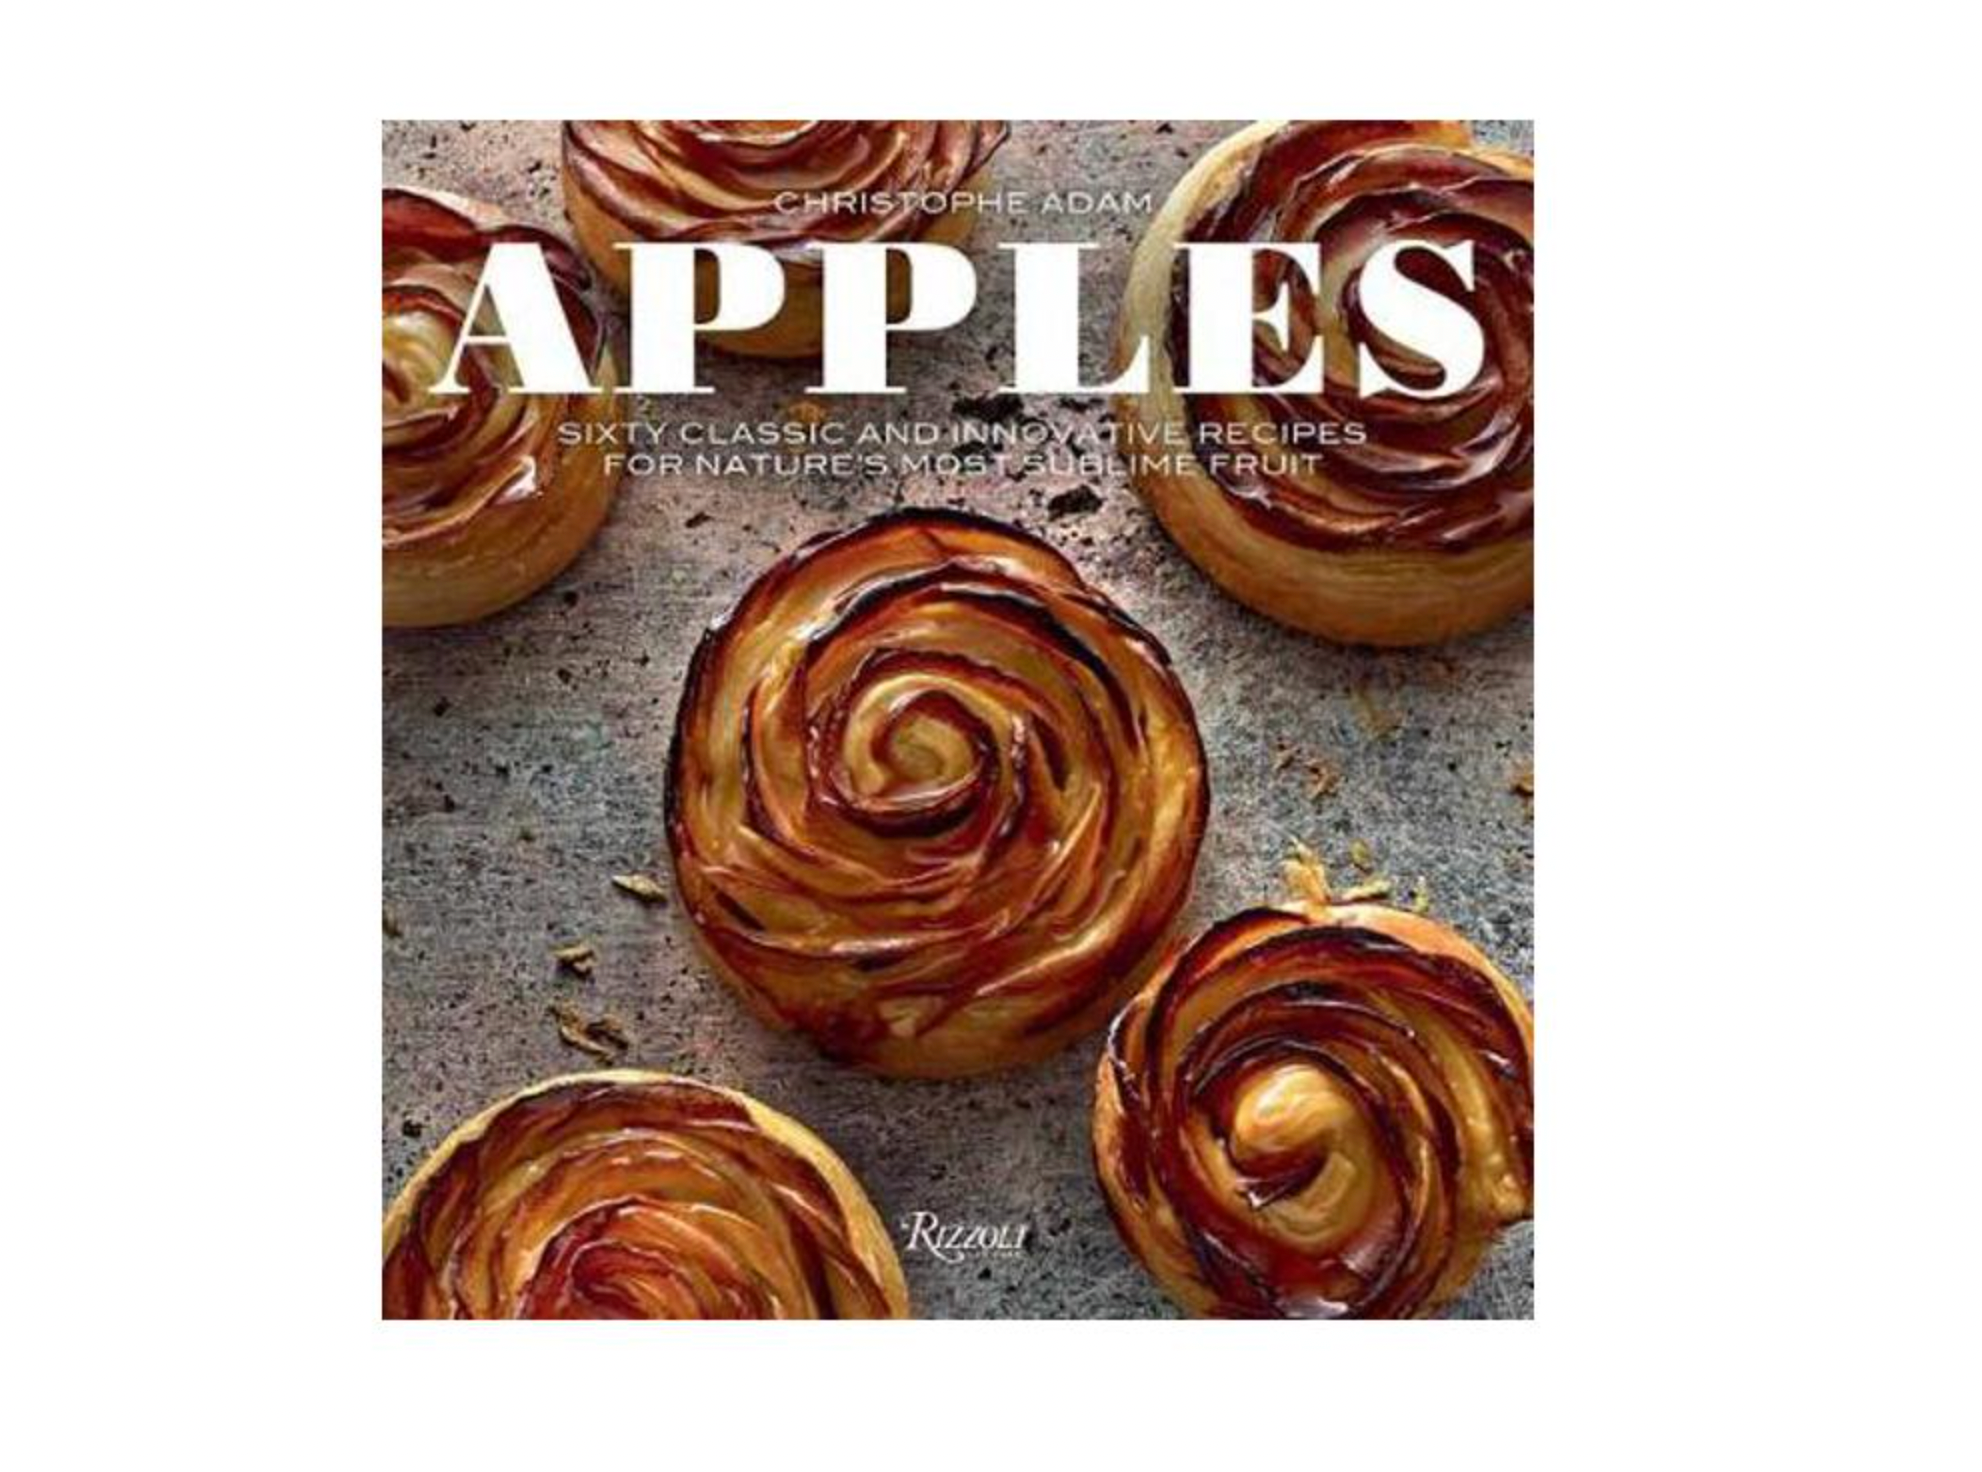 Apples: Sixty Classic and Innovative Recipes for nature's most sublime fruit